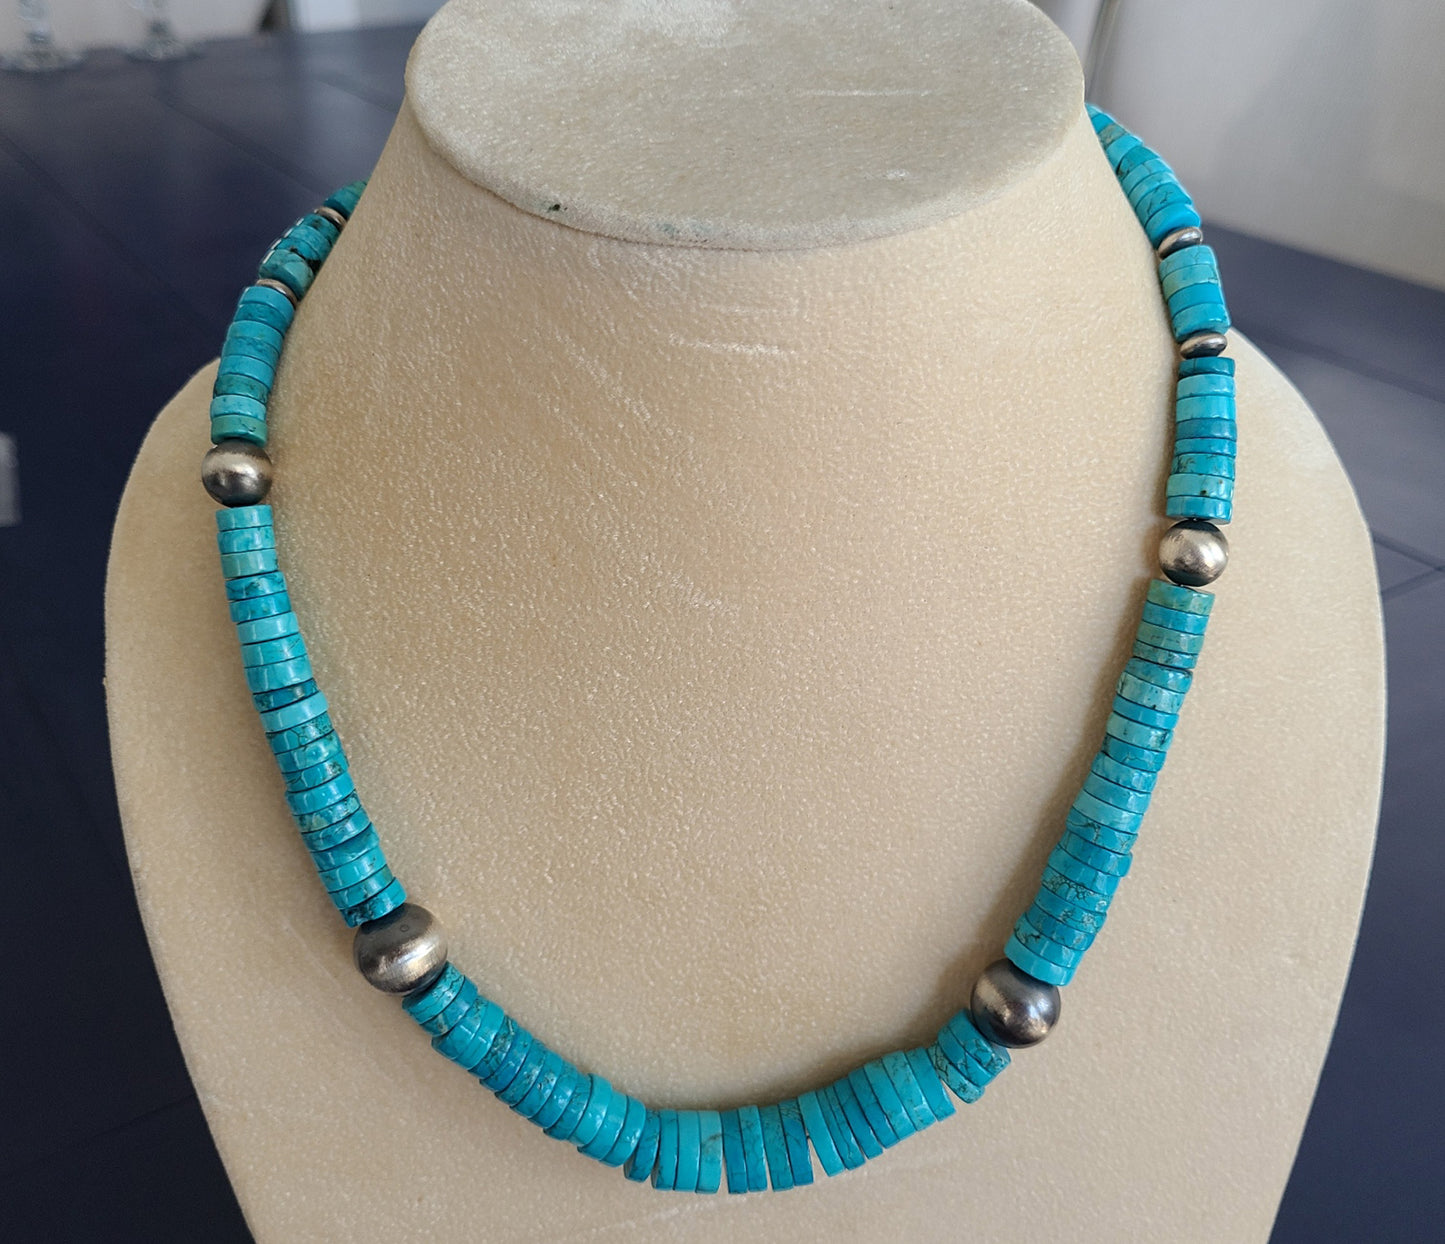 Kingman Turquoise beads are graduated from approximately 3 cm to 12 cm round.  Handmade Sterling Silver beads have an oxidized look so that the turquoise really pops bright blue. Lobster Claw closure. Approximately 20 inches long. Navajo Artist, Mason Lee